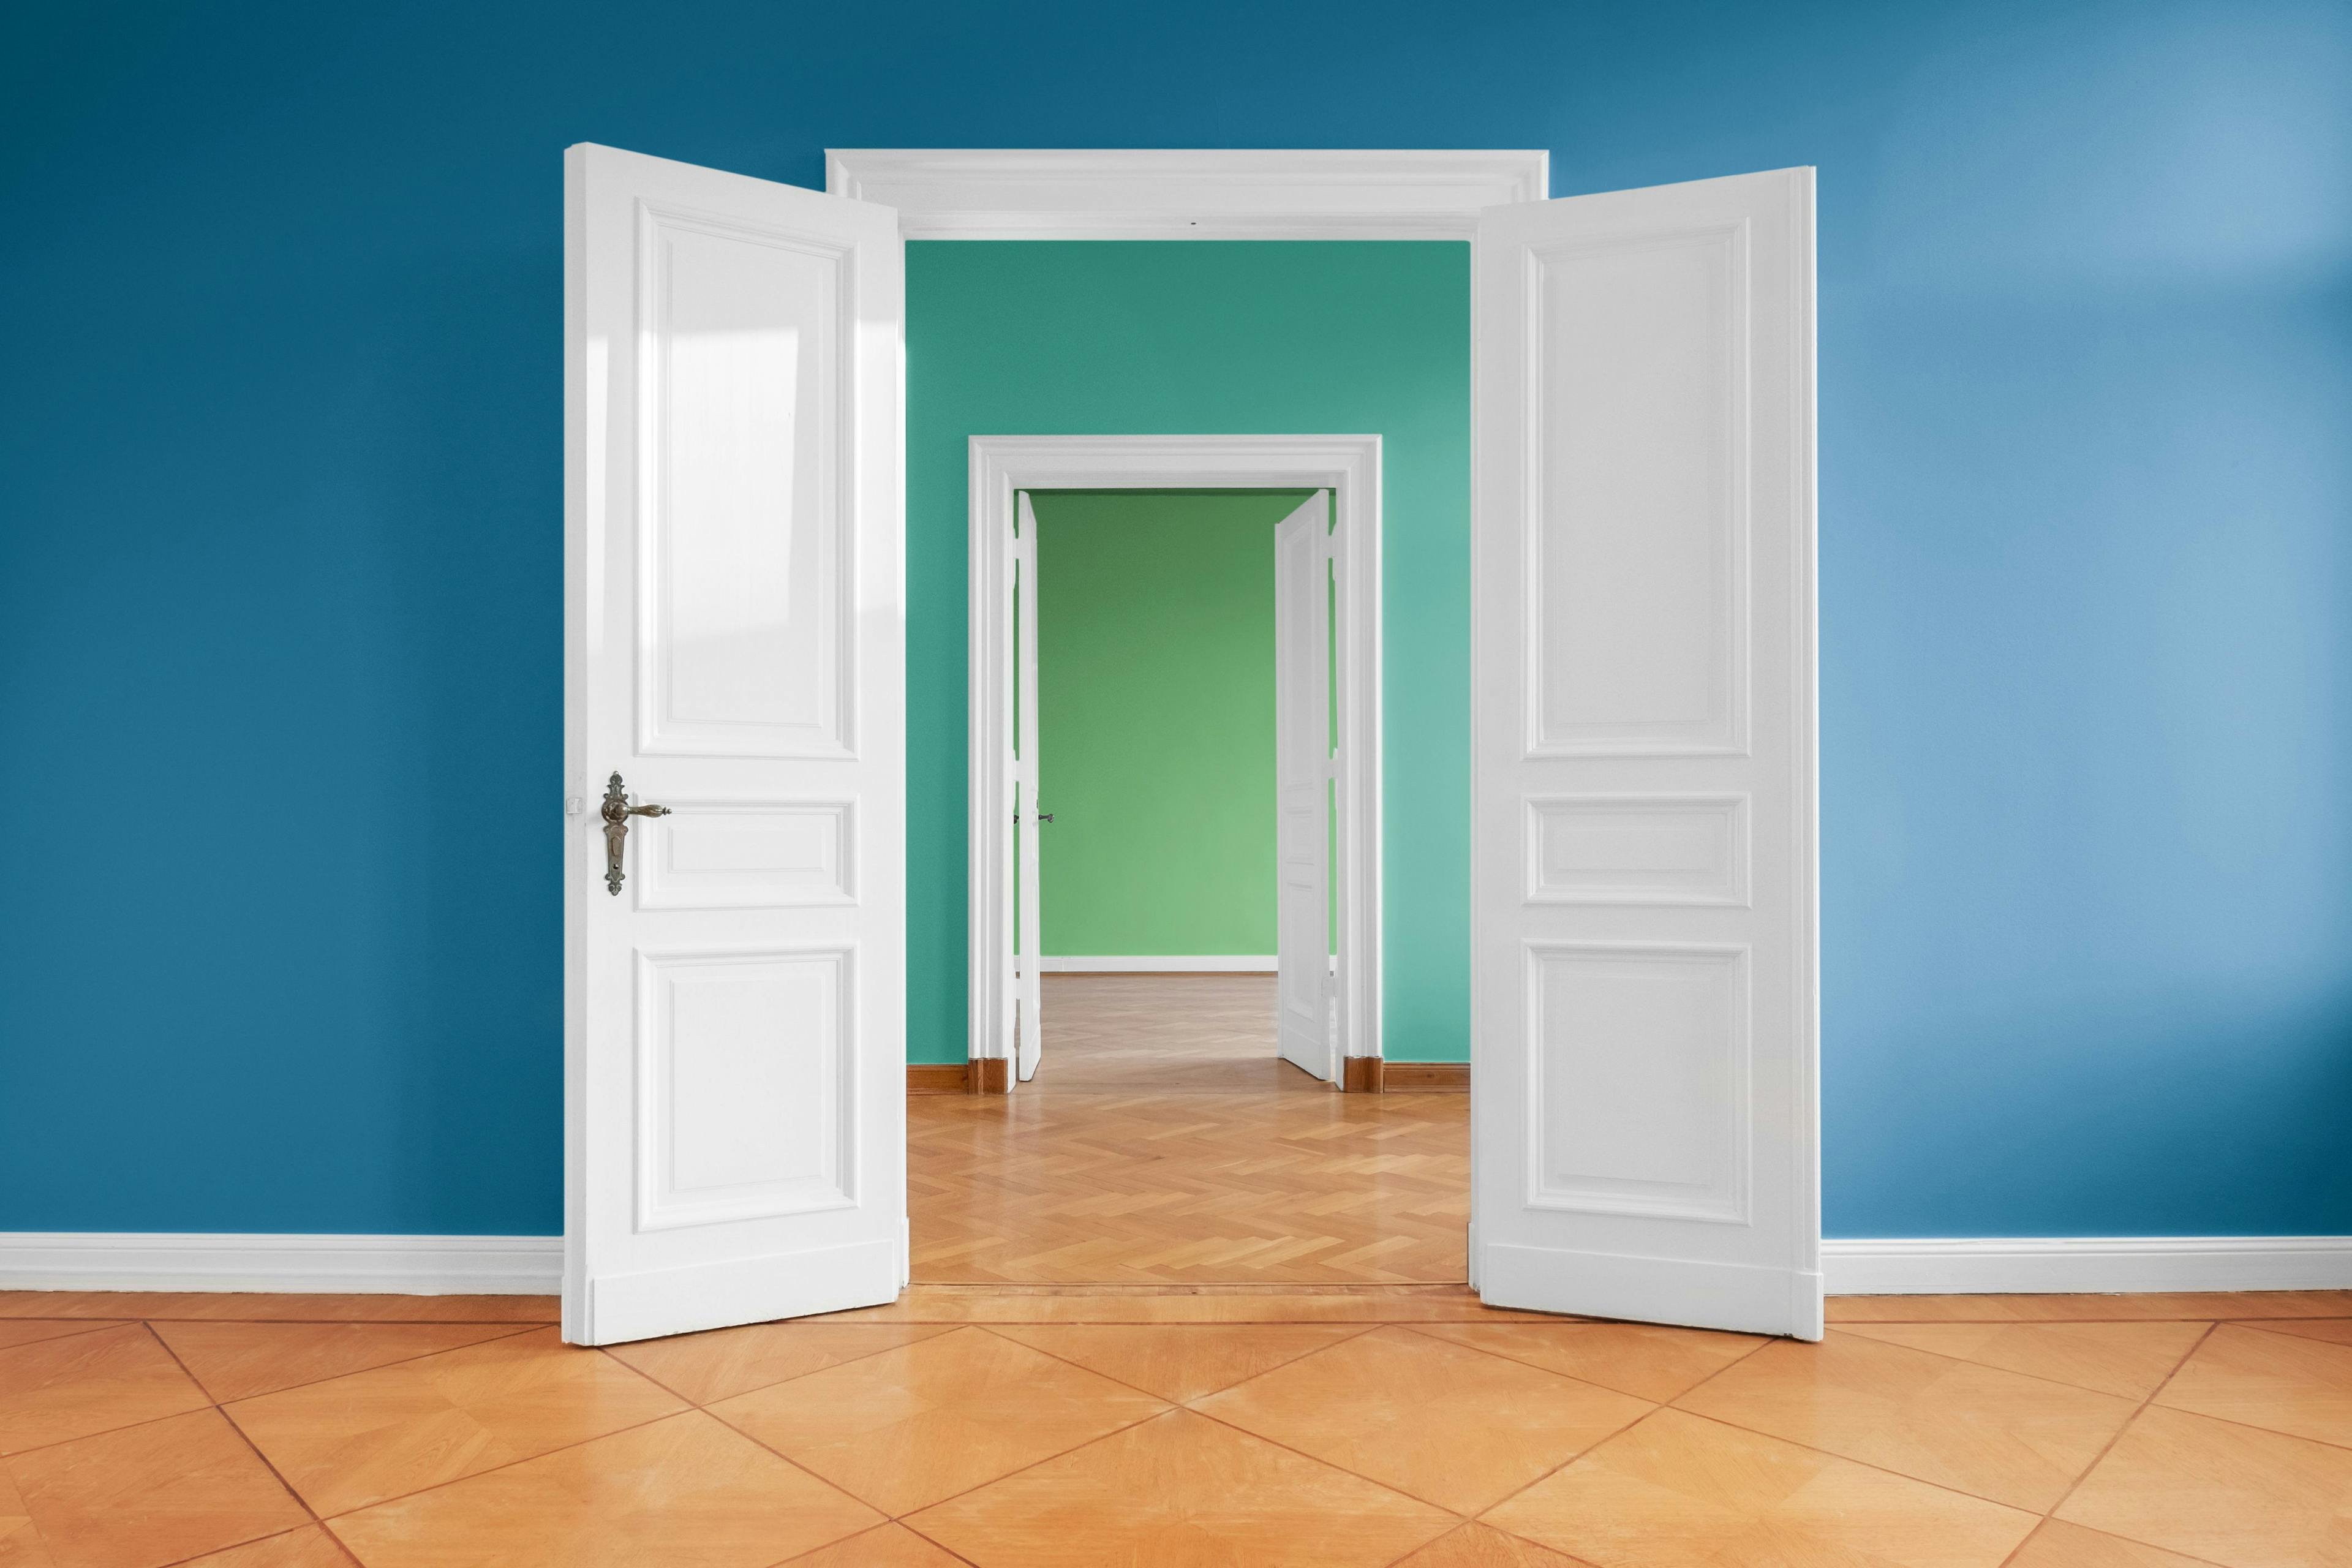 image of a white door leading into other open spaces to show that they are accessible